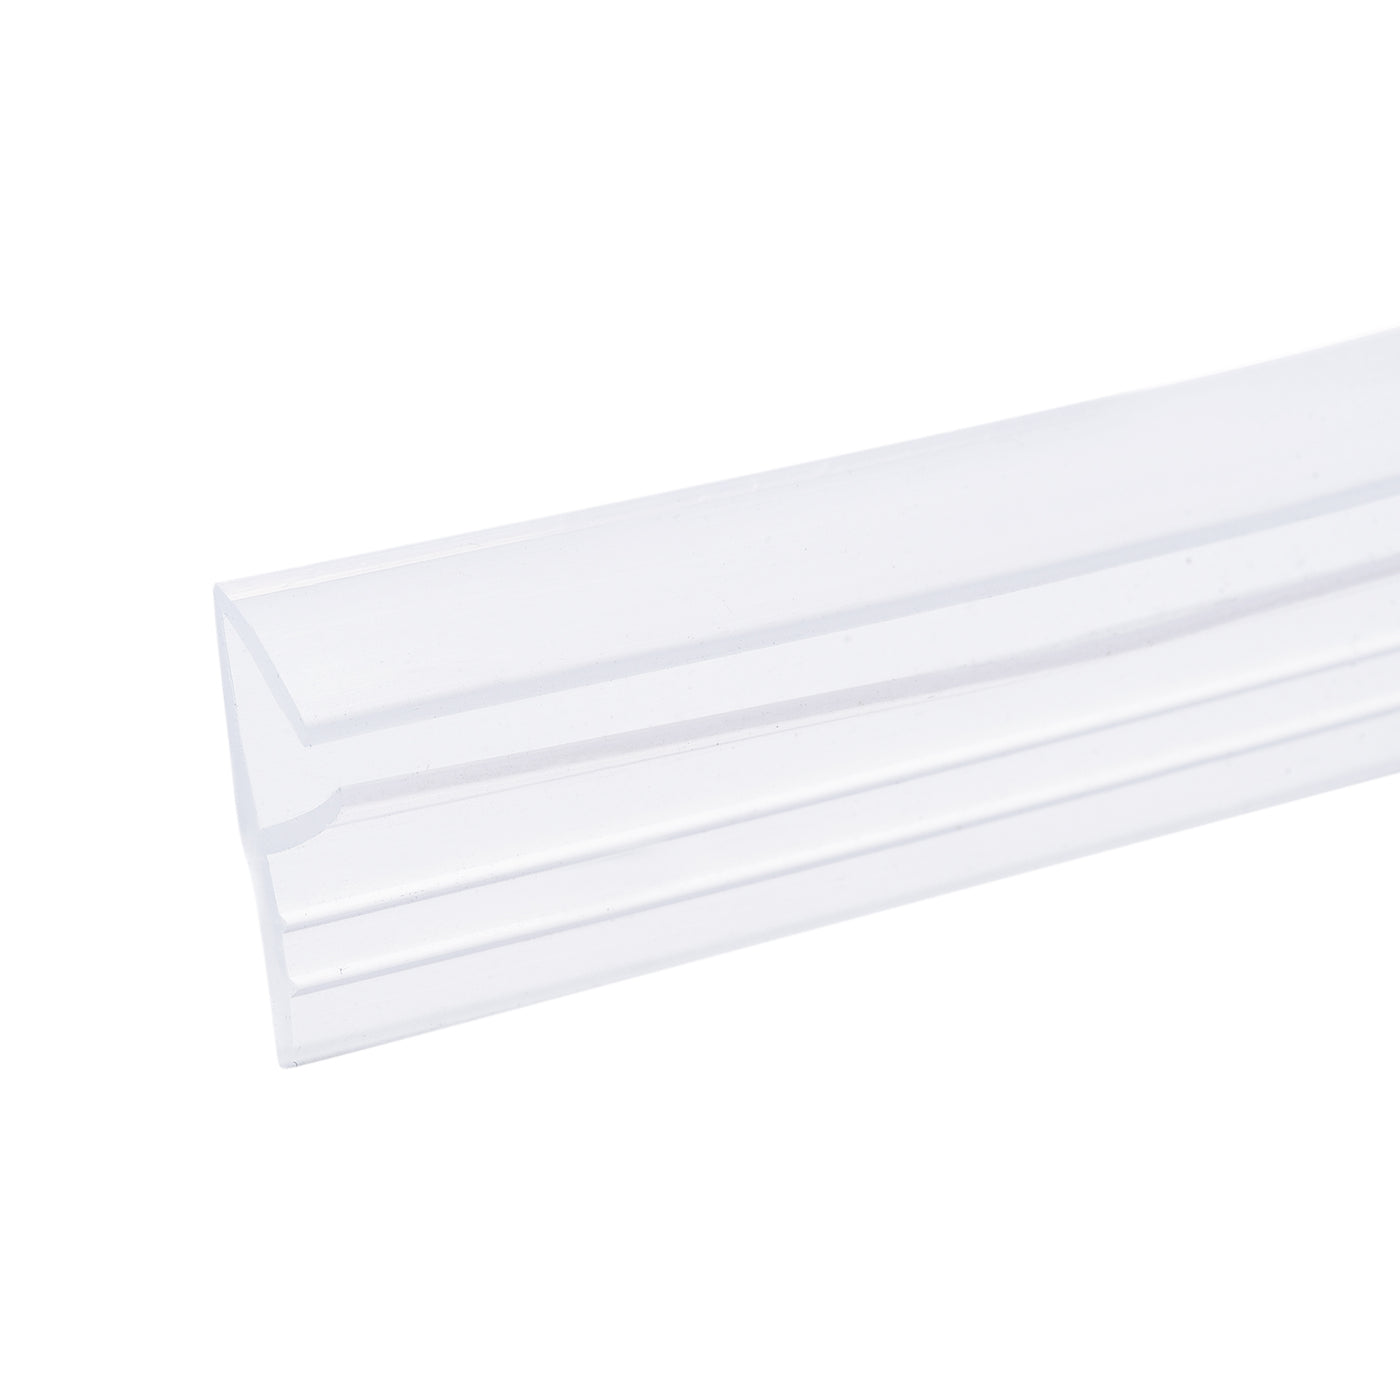 Uxcell Uxcell Frameless Glass Shower Door Sweep 137.8" for 1/2"(12mm) Glass F-Type Seal Strip